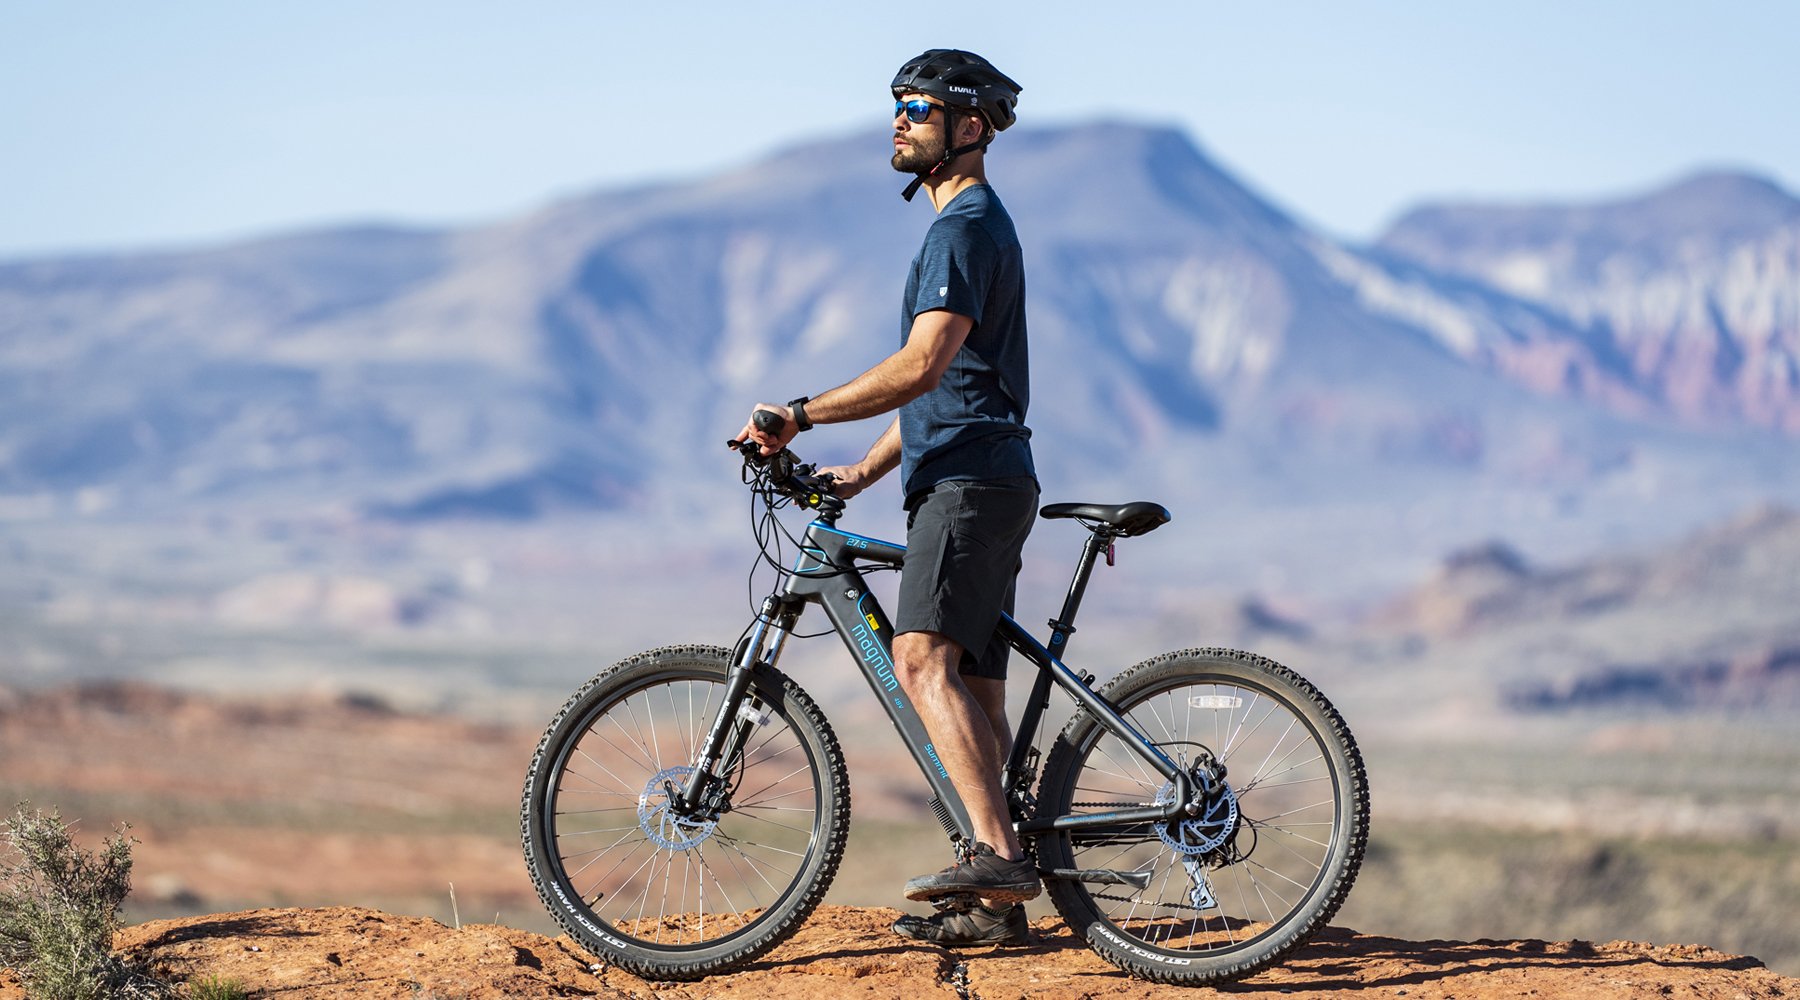 Rider with blue t-shirt black shorts standing over Magnum Summit e-bike looking into the distance desert hills in background